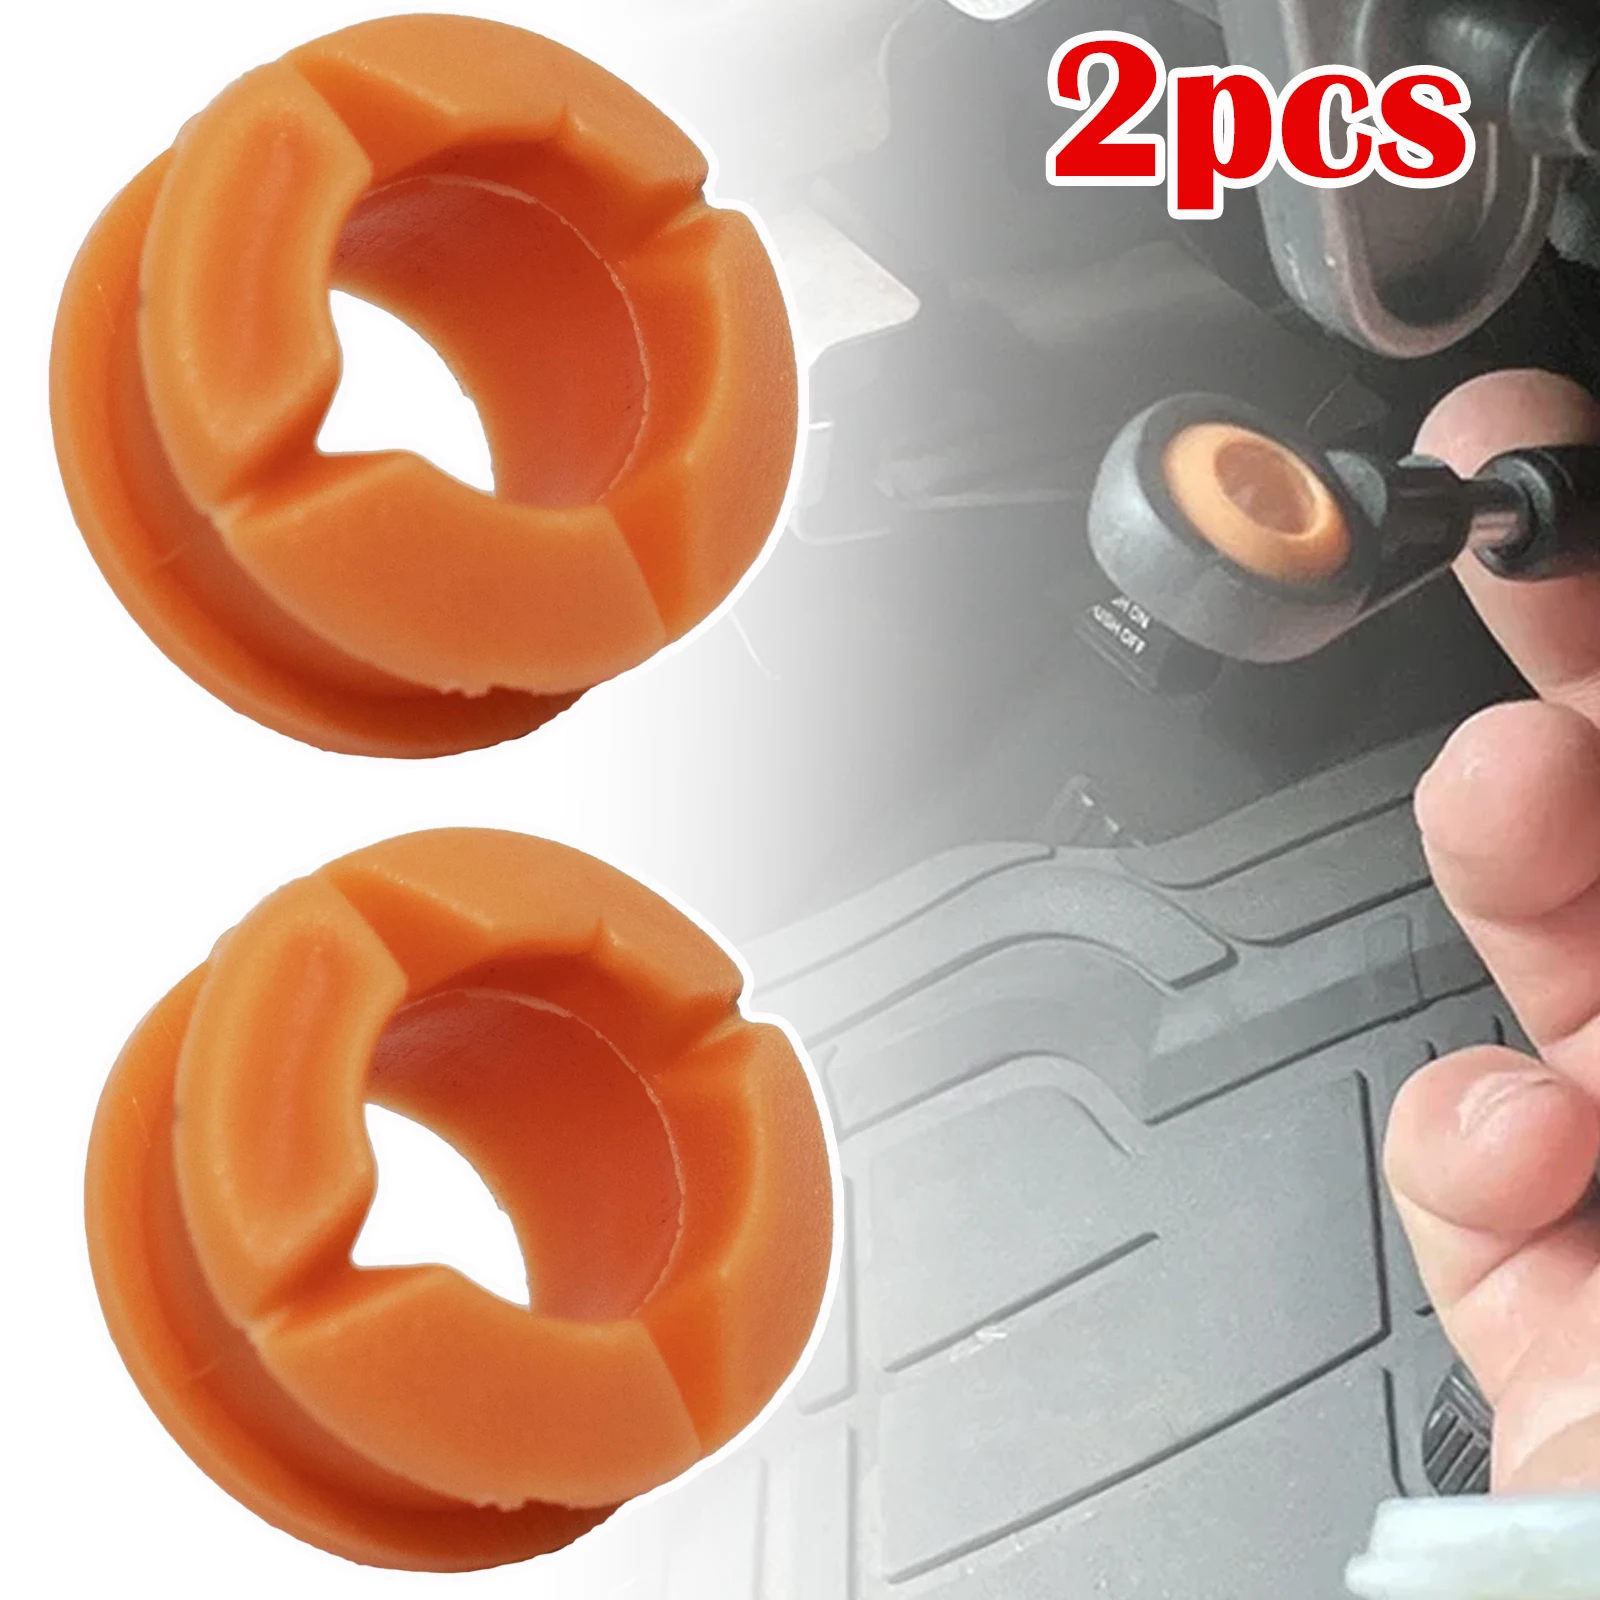 

2PCs Shift Cable Bushing Grommet AT Gearbox Repair Kit Shifter Linkage End Clip For Nissan Pathfinder Xterra Titan 2005 - 2012